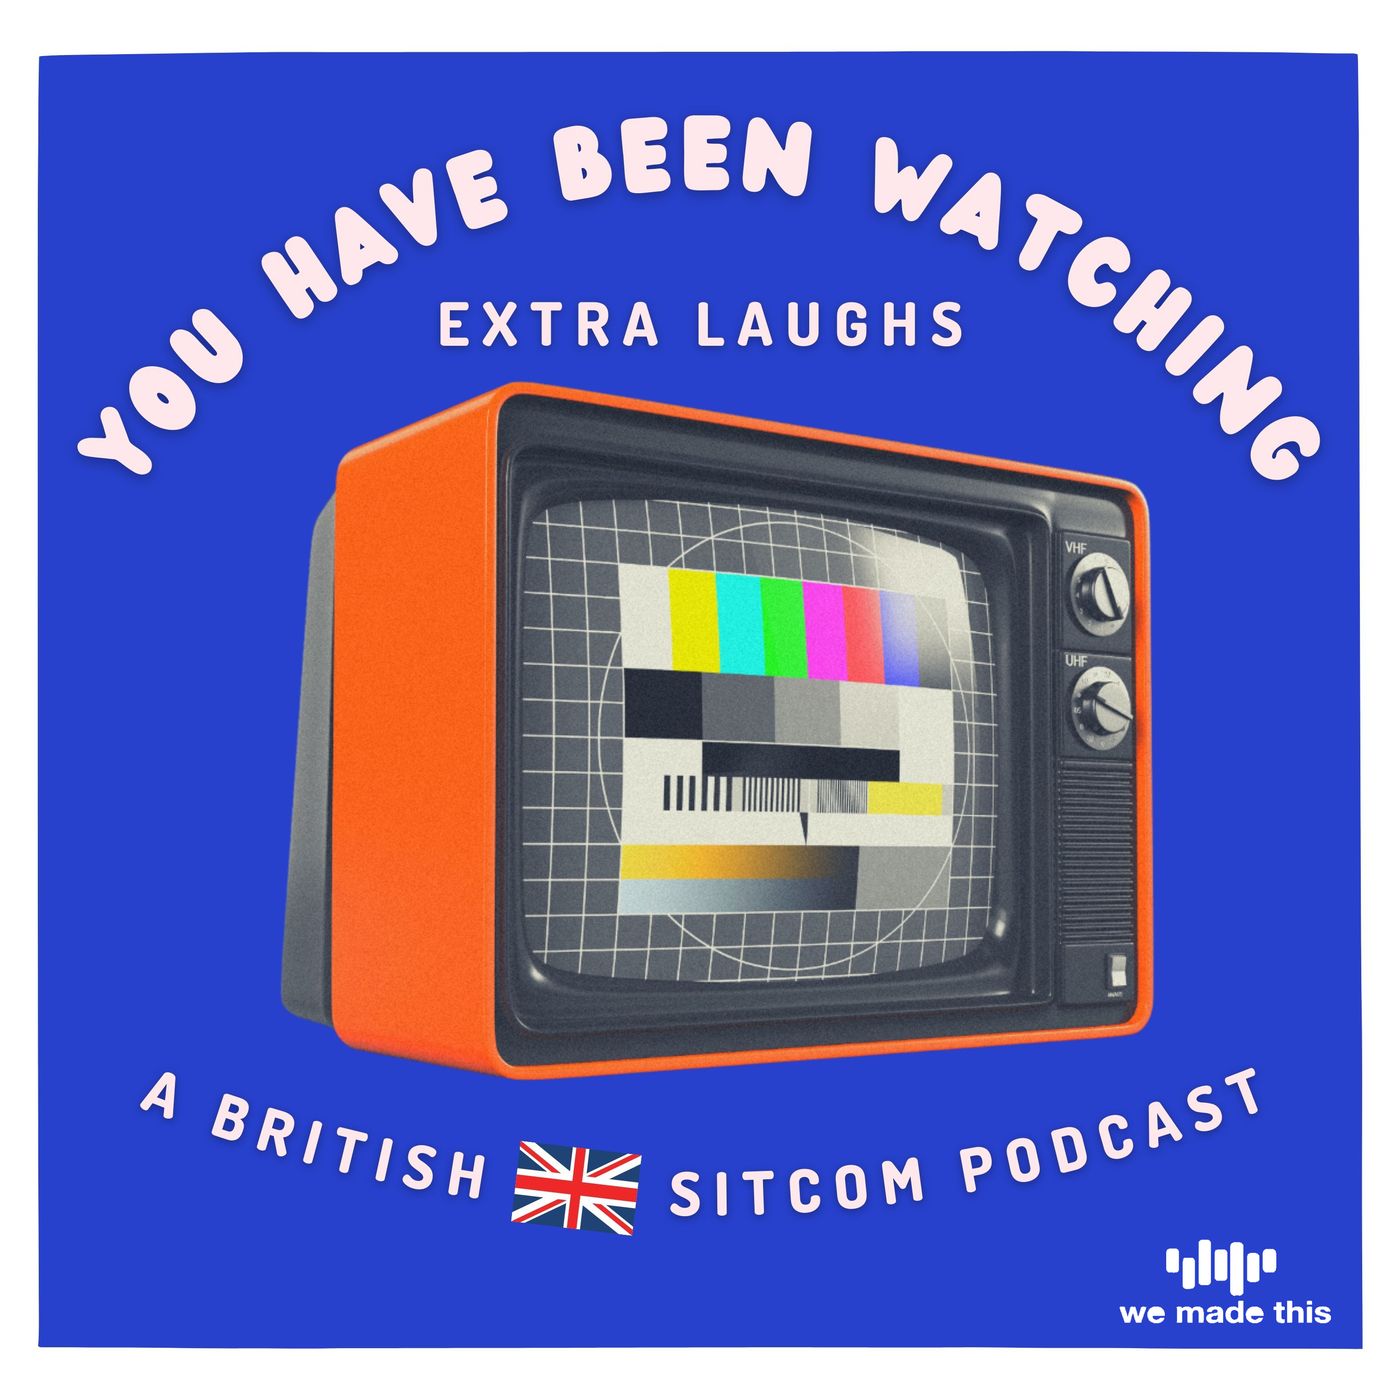 You Have Been Watching: Extra Laughs podcast tile